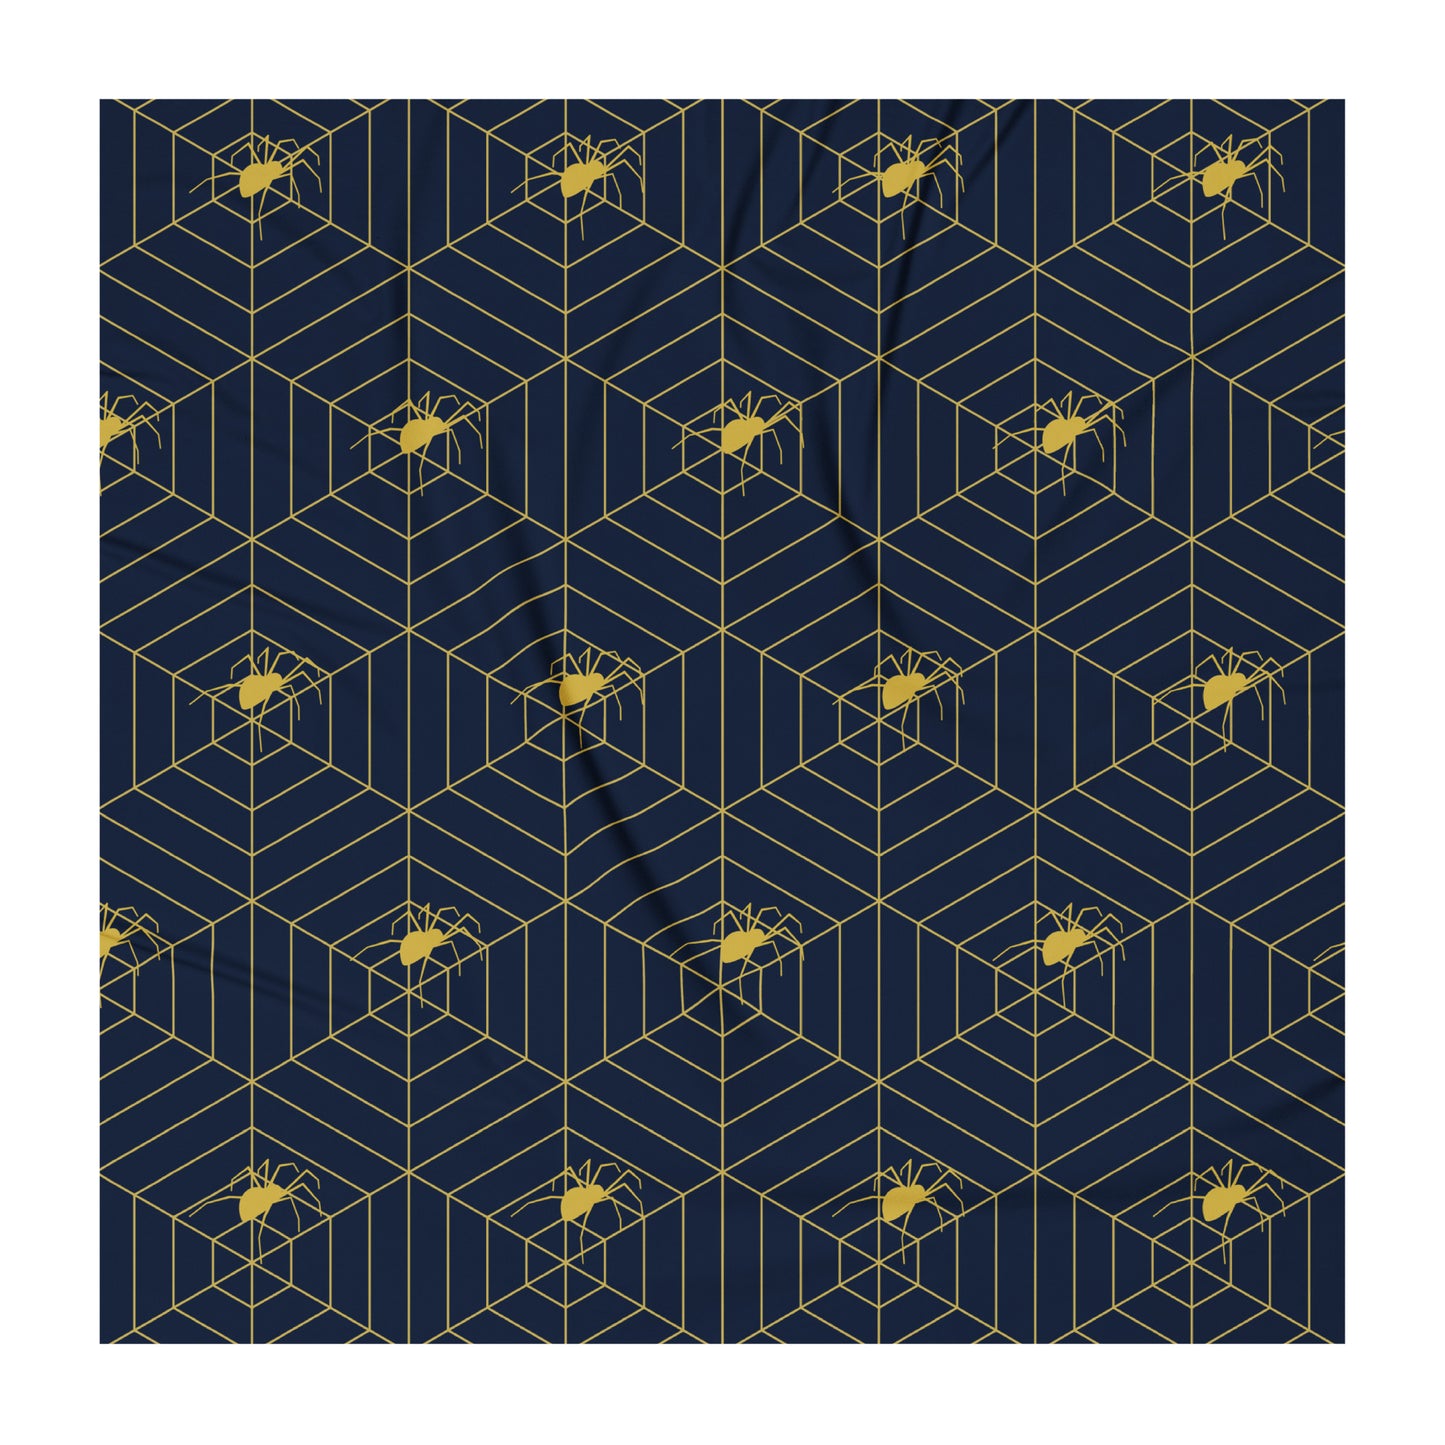 Geometric Spider recycled polyester fabric